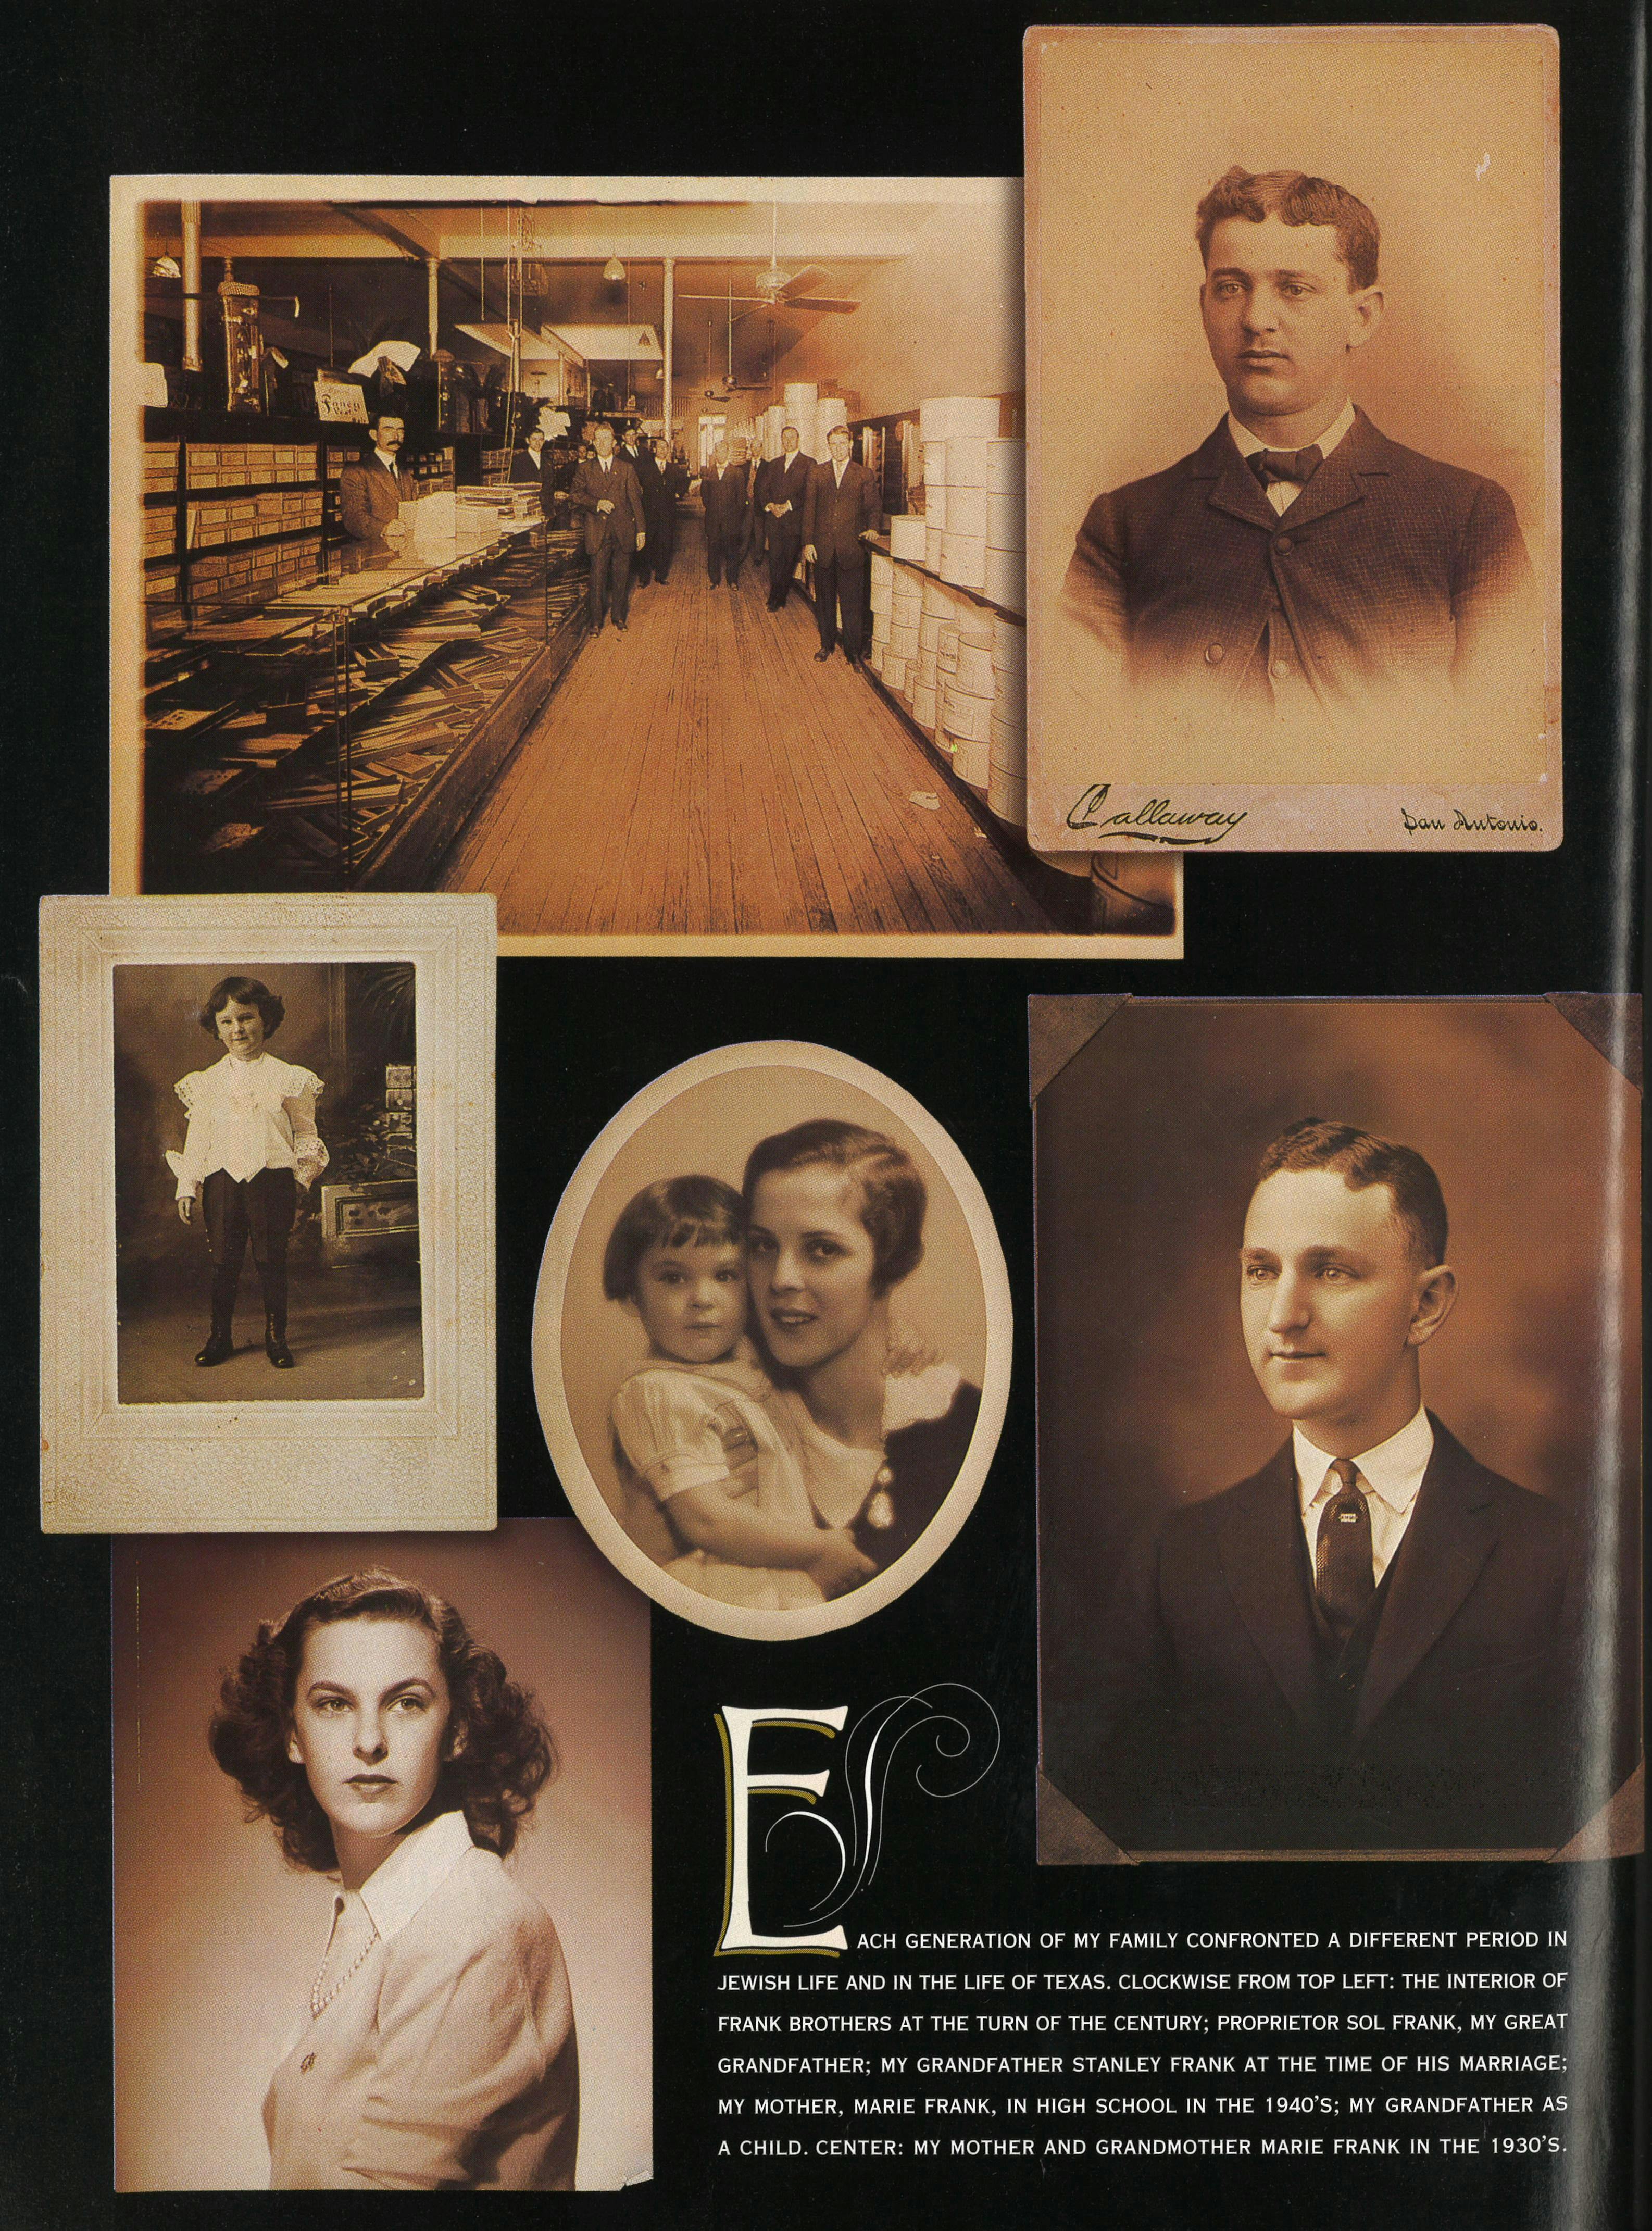 Each generation of my family confronted a different period in Jewish life and in the life of Texas. Clockwise from top left: the interior of Frank Brothers at the turn of the century; proprietor Sol Frank, my great-grandfather; my grandfather Stanley Frank at the time of his marriage; my mother, Marie Frank, in high school in the 1940s; my grandfather as a child. Center: my mother and grandmother Marie Frank in the 1930s.